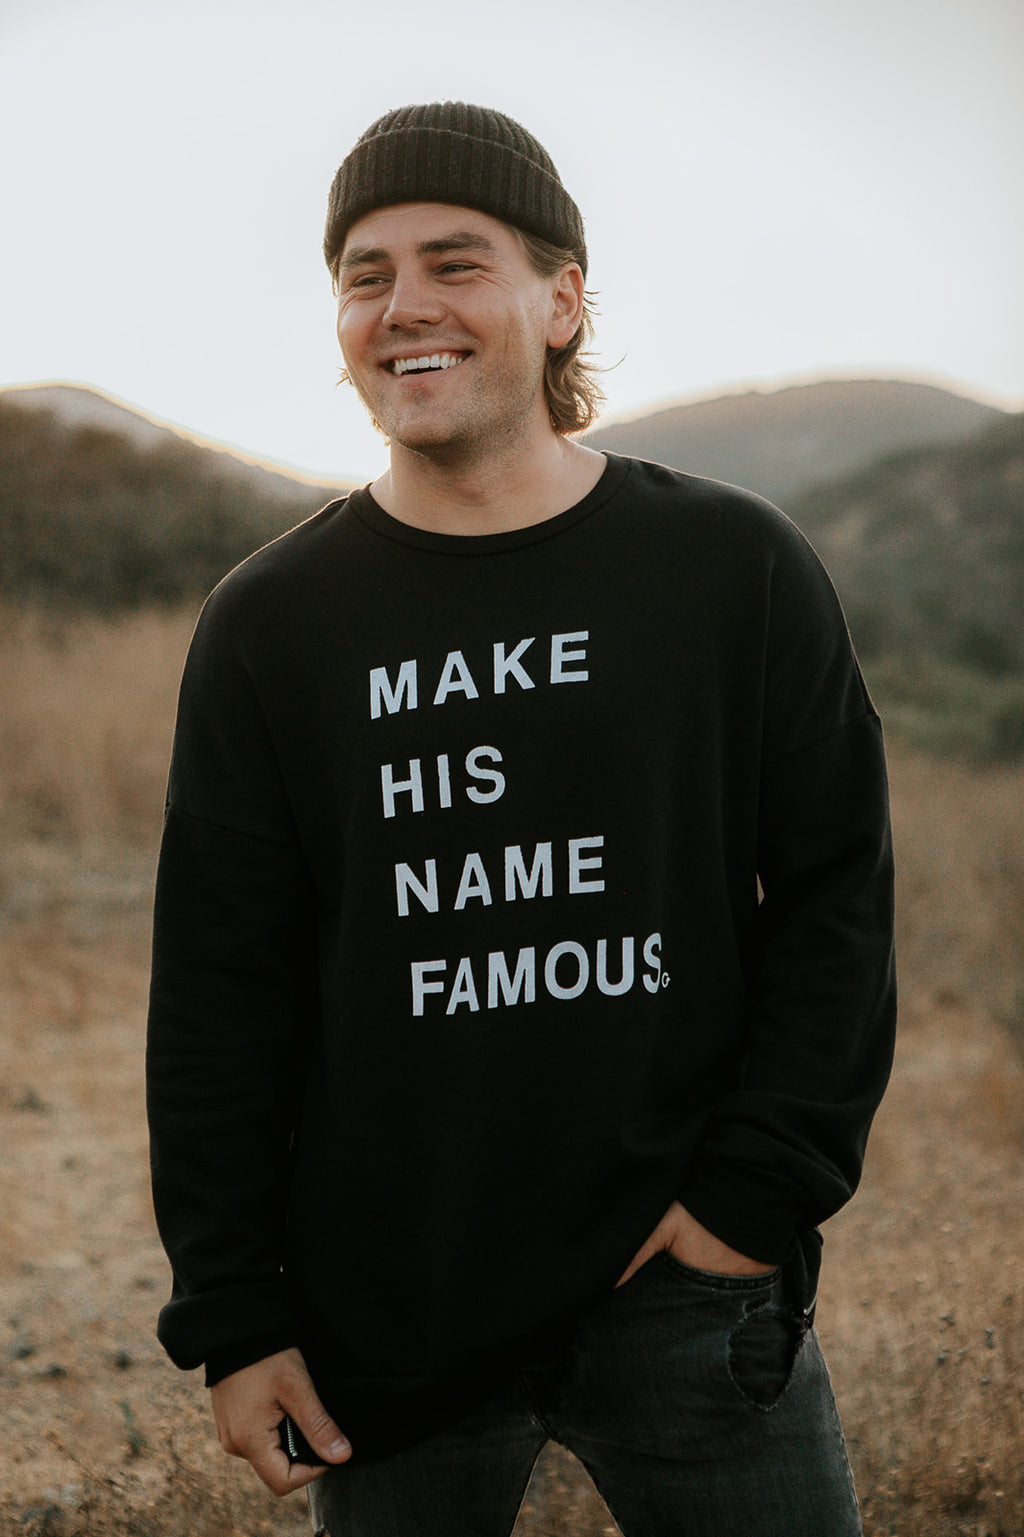 MAKE HIS NAME FAMOUS BLACK CREW NECK SWEATSHIRT WITH SIDE ZIPPERS